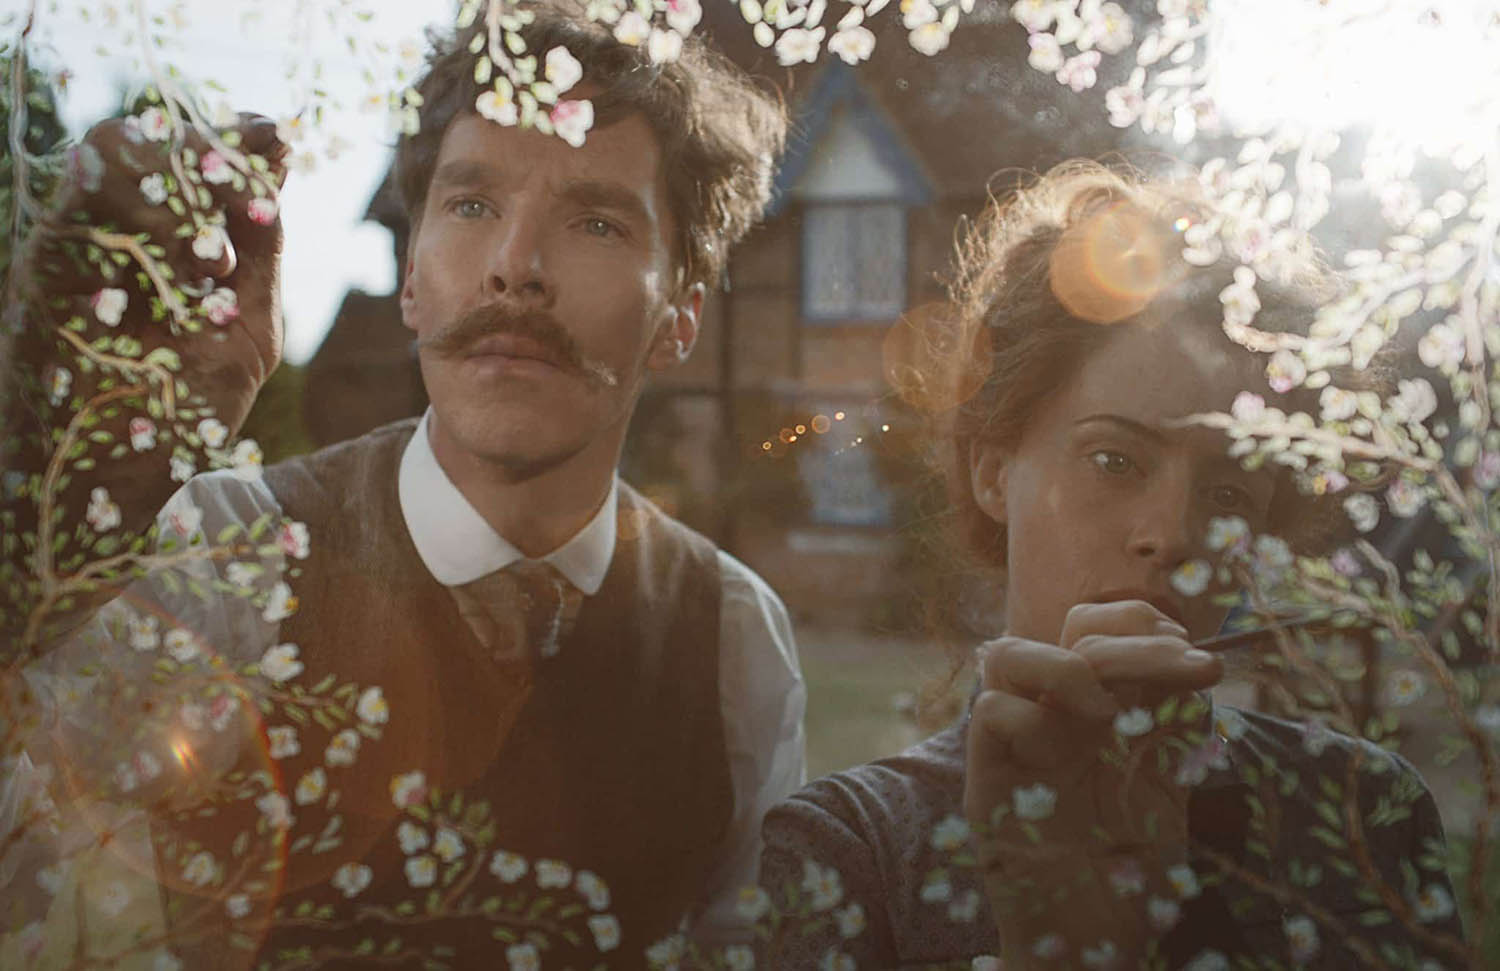 The Electrical Life Of Louis Wain 4K Benedict Cumberbatch Wallpapers